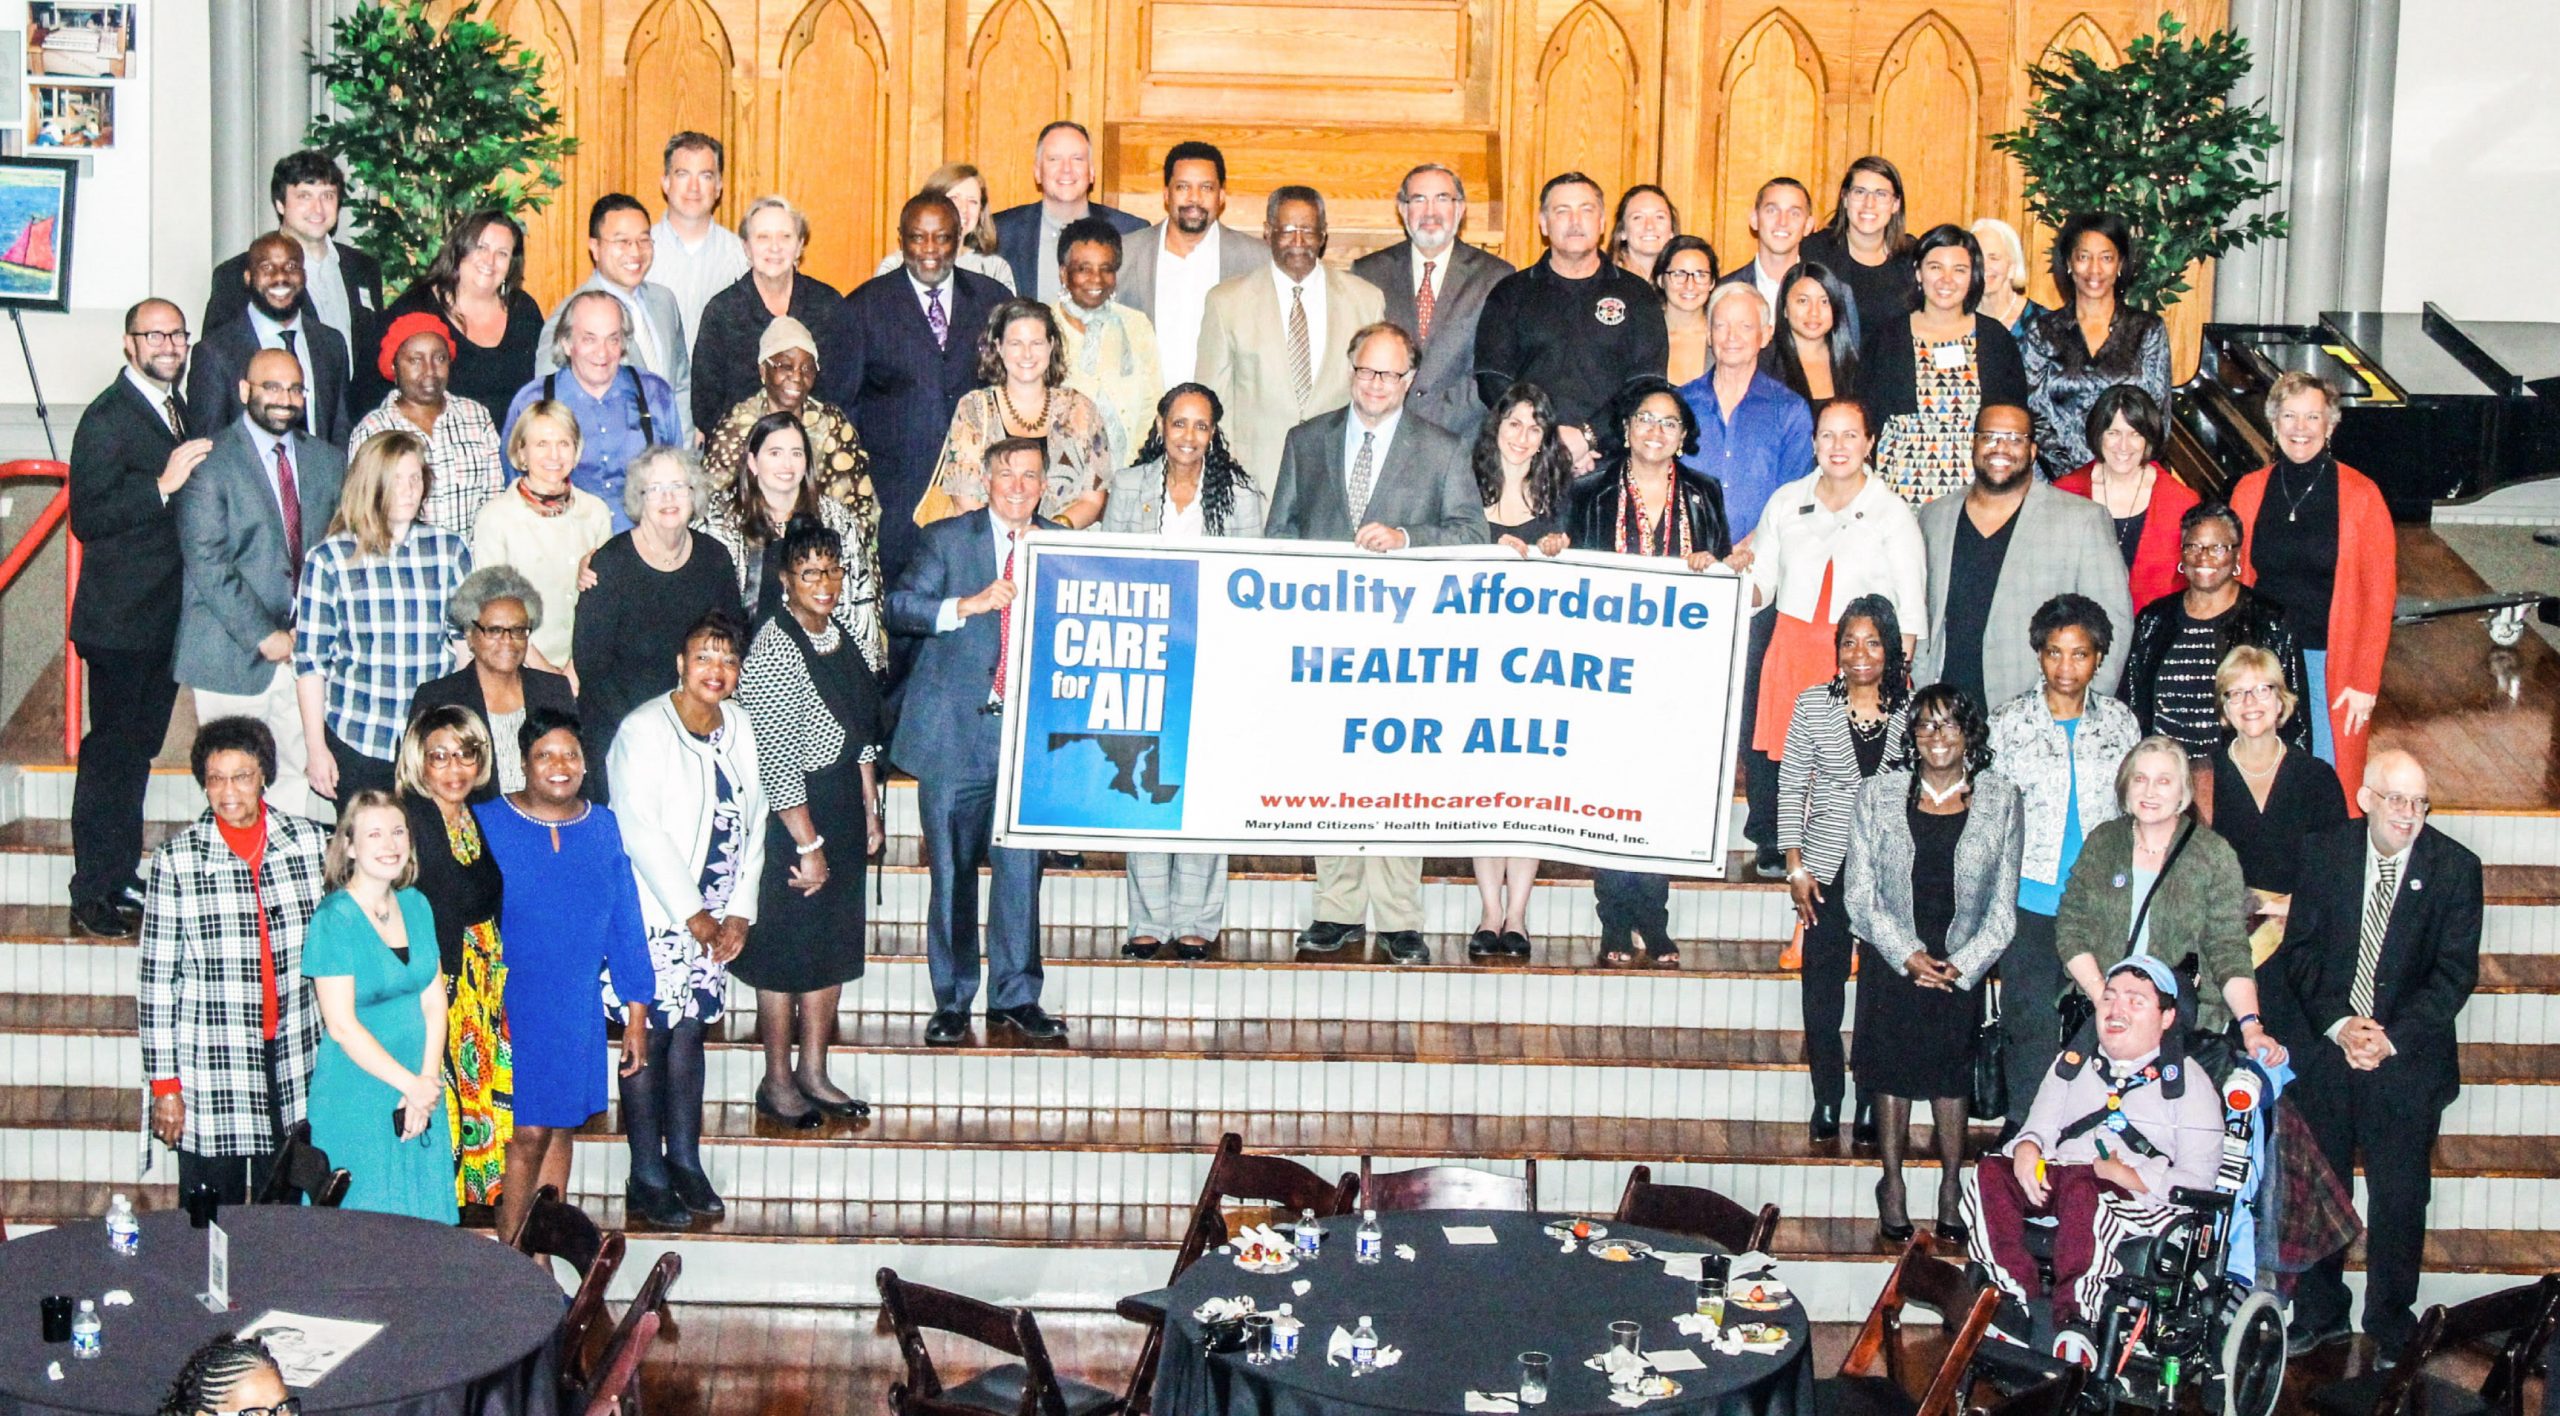 Media Release: Access to Care Act Passes General Assembly